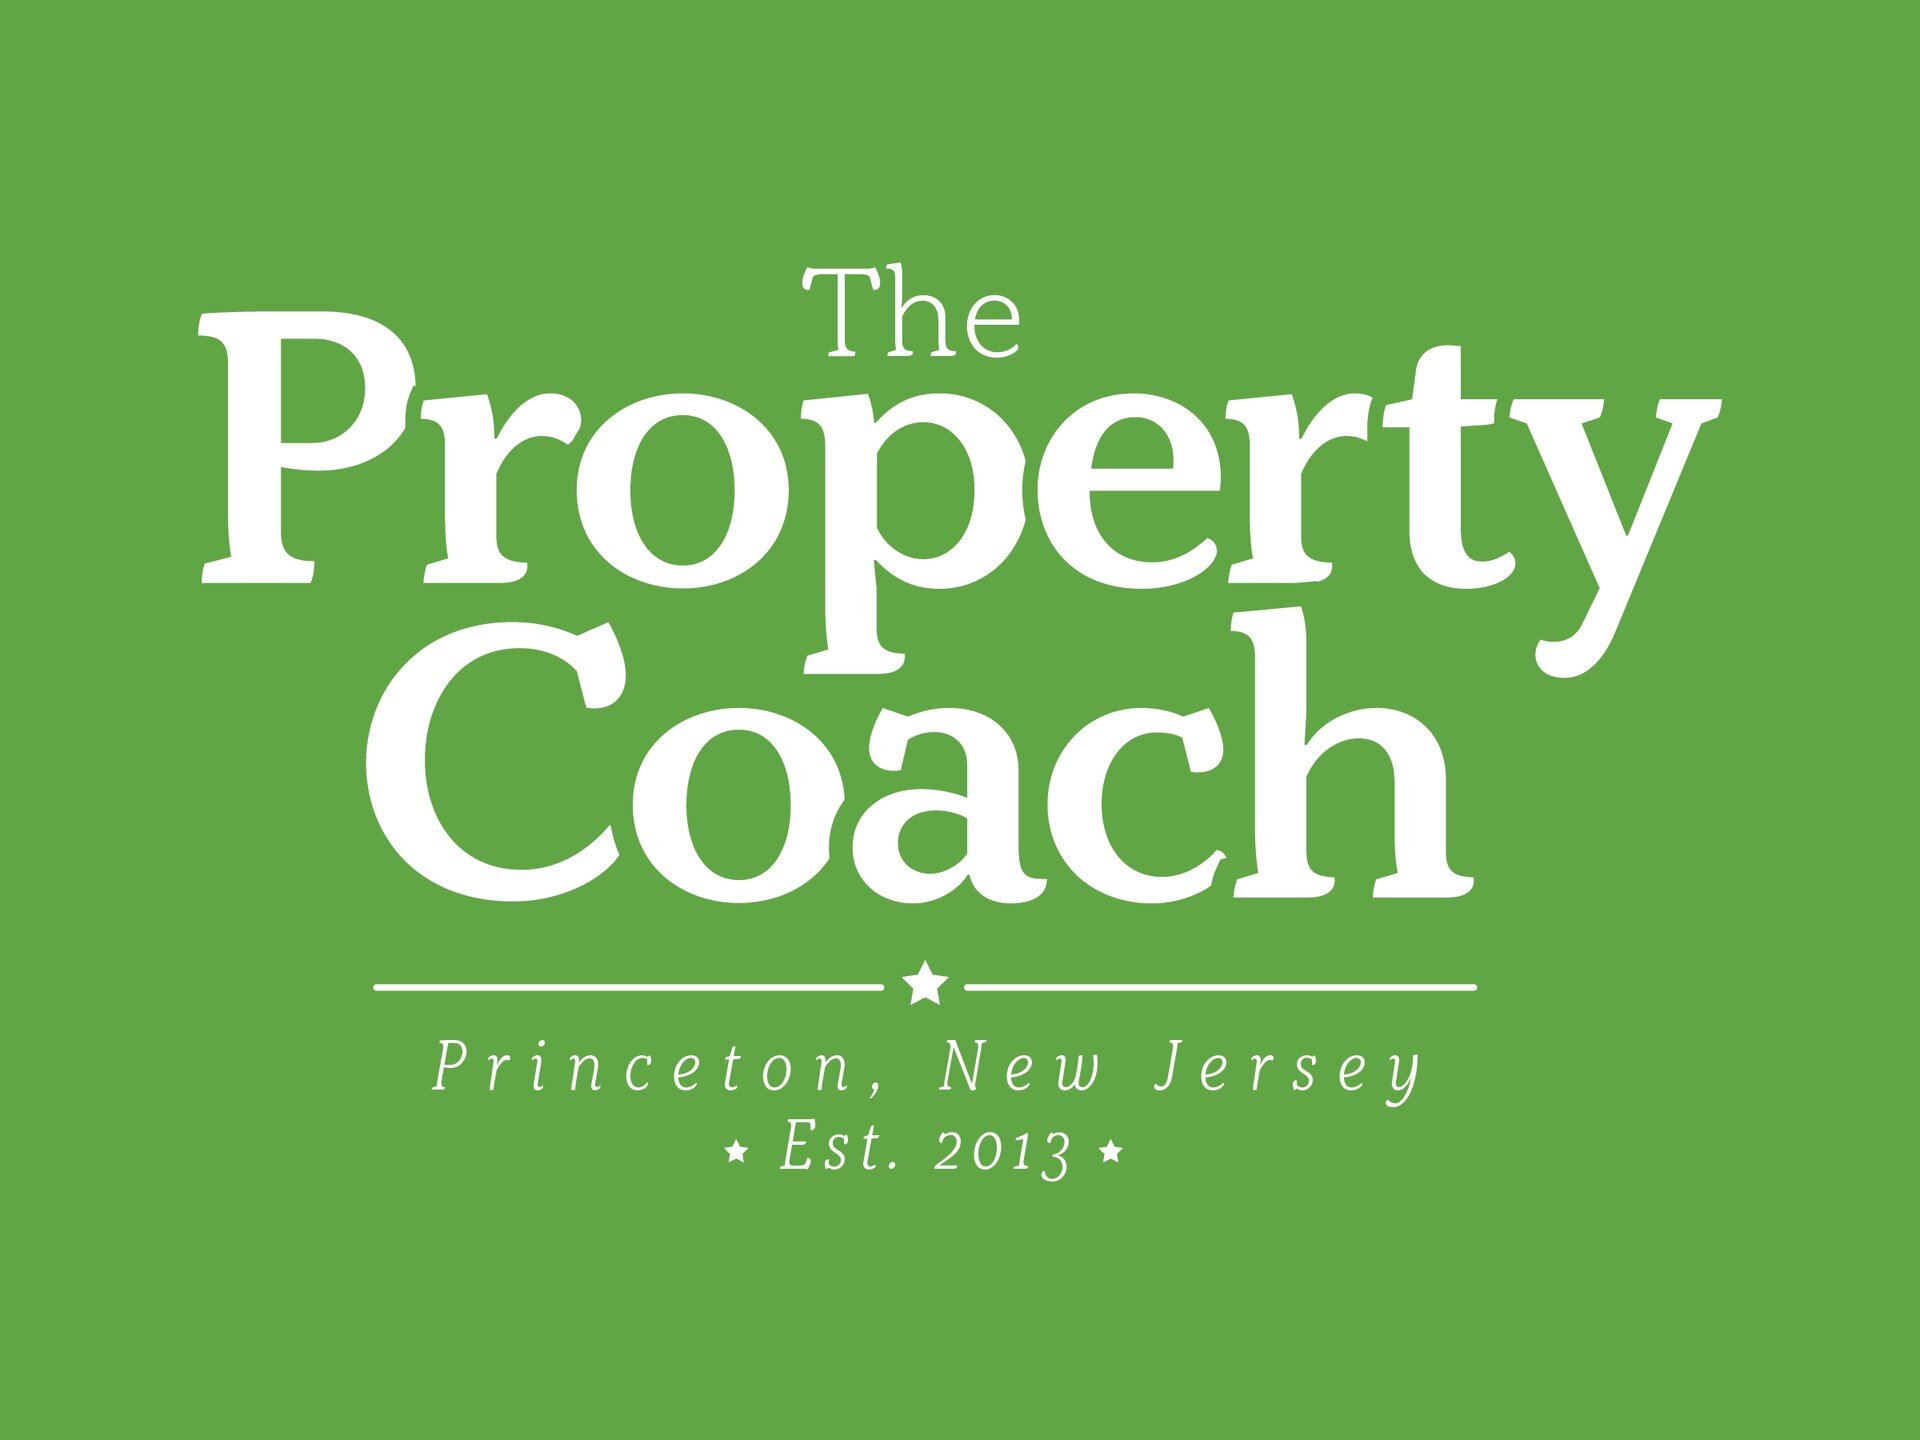 New year, new us! We're kicking off 2024 with our new logo, website, and brand. Check us out at: https://www.thepropertycoach.com/

We can't wait for Spring, but until then we are building!

#landscaper #landscaperslife #landscapers #business #landsc